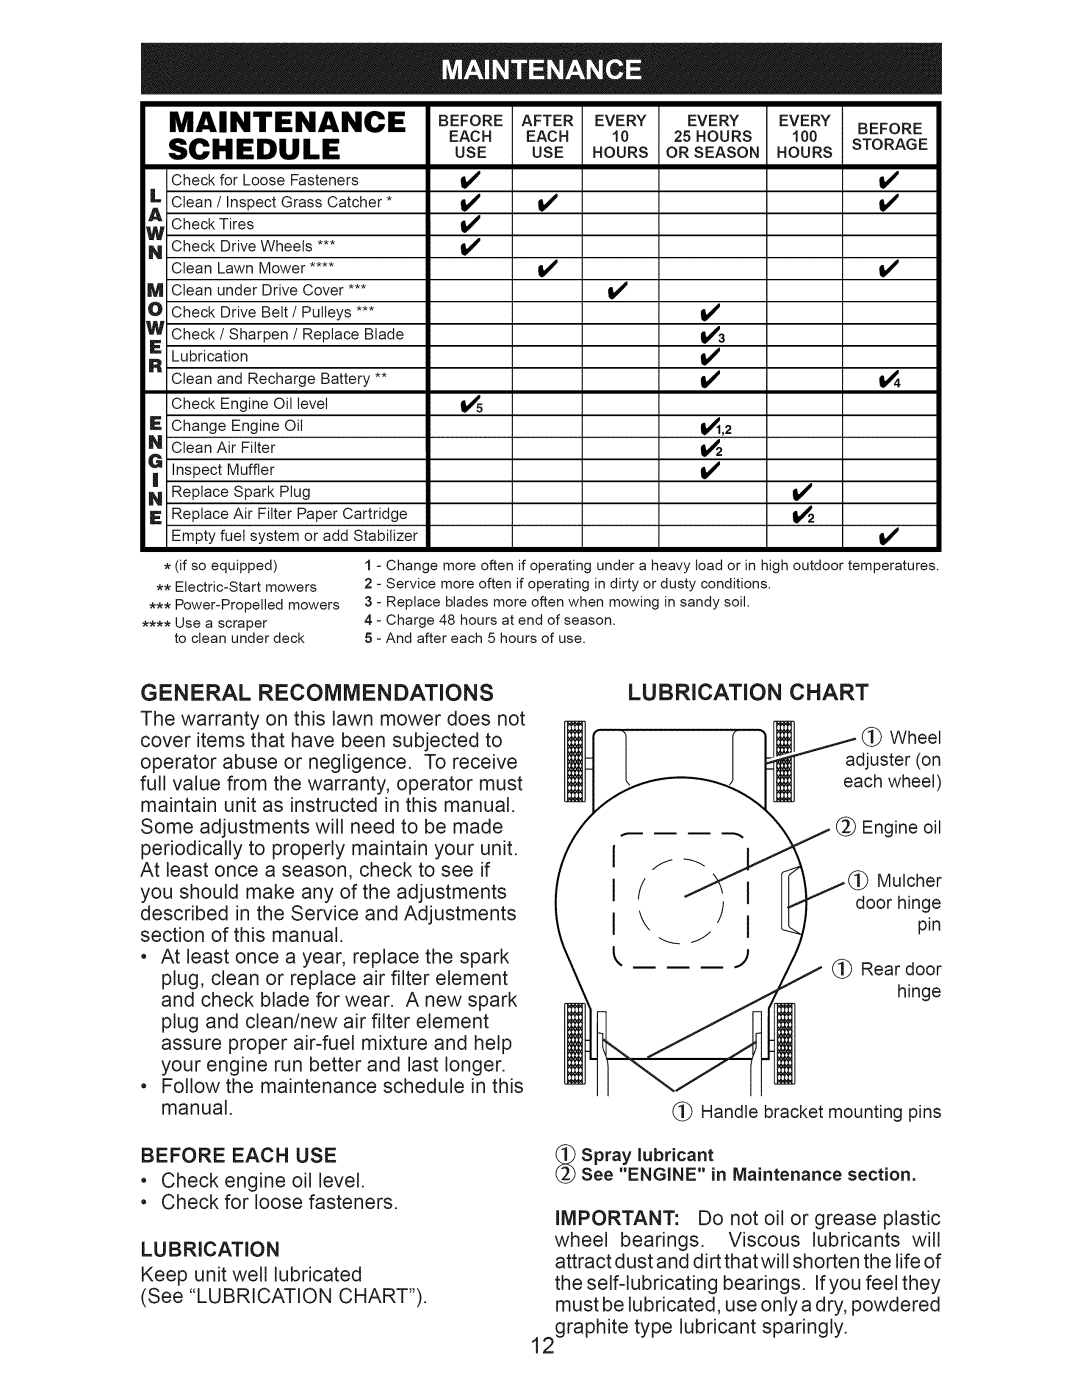 Craftsman 917.374042 owner manual Maintenance, Schedule, Use Hours 